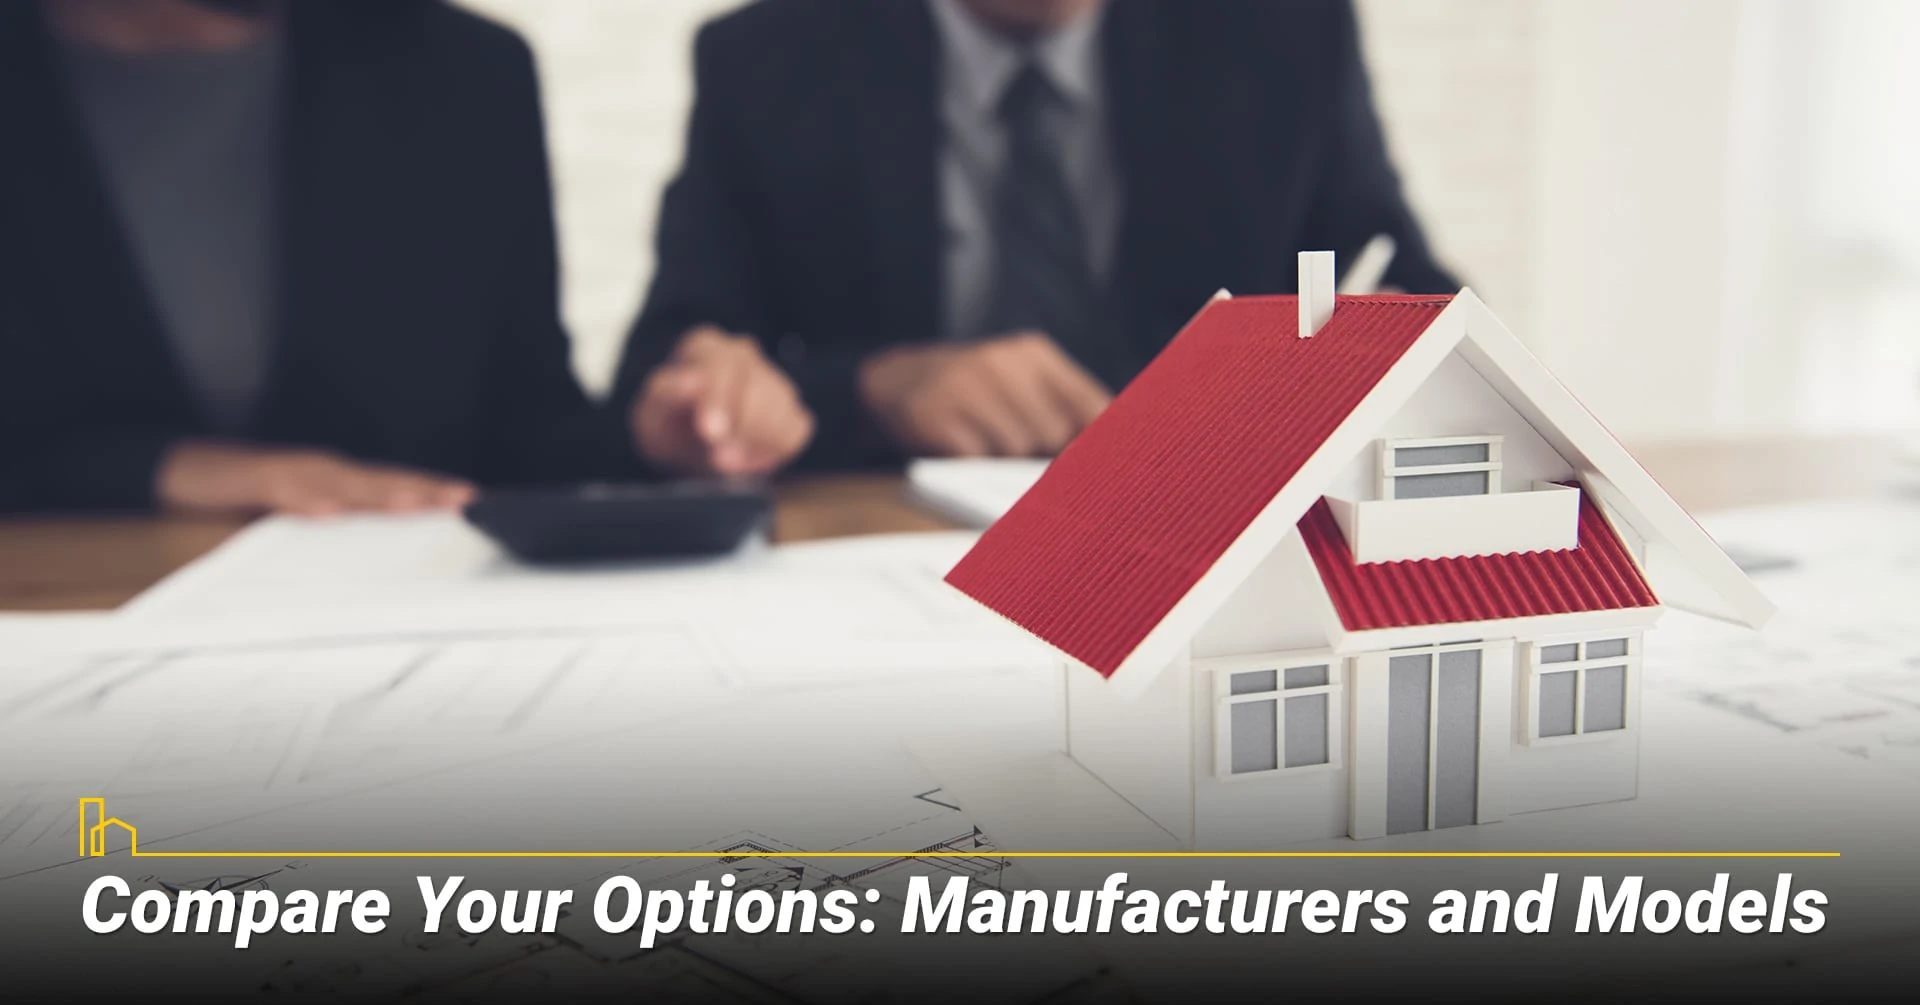 Compare Your Options: Manufacturers and Models